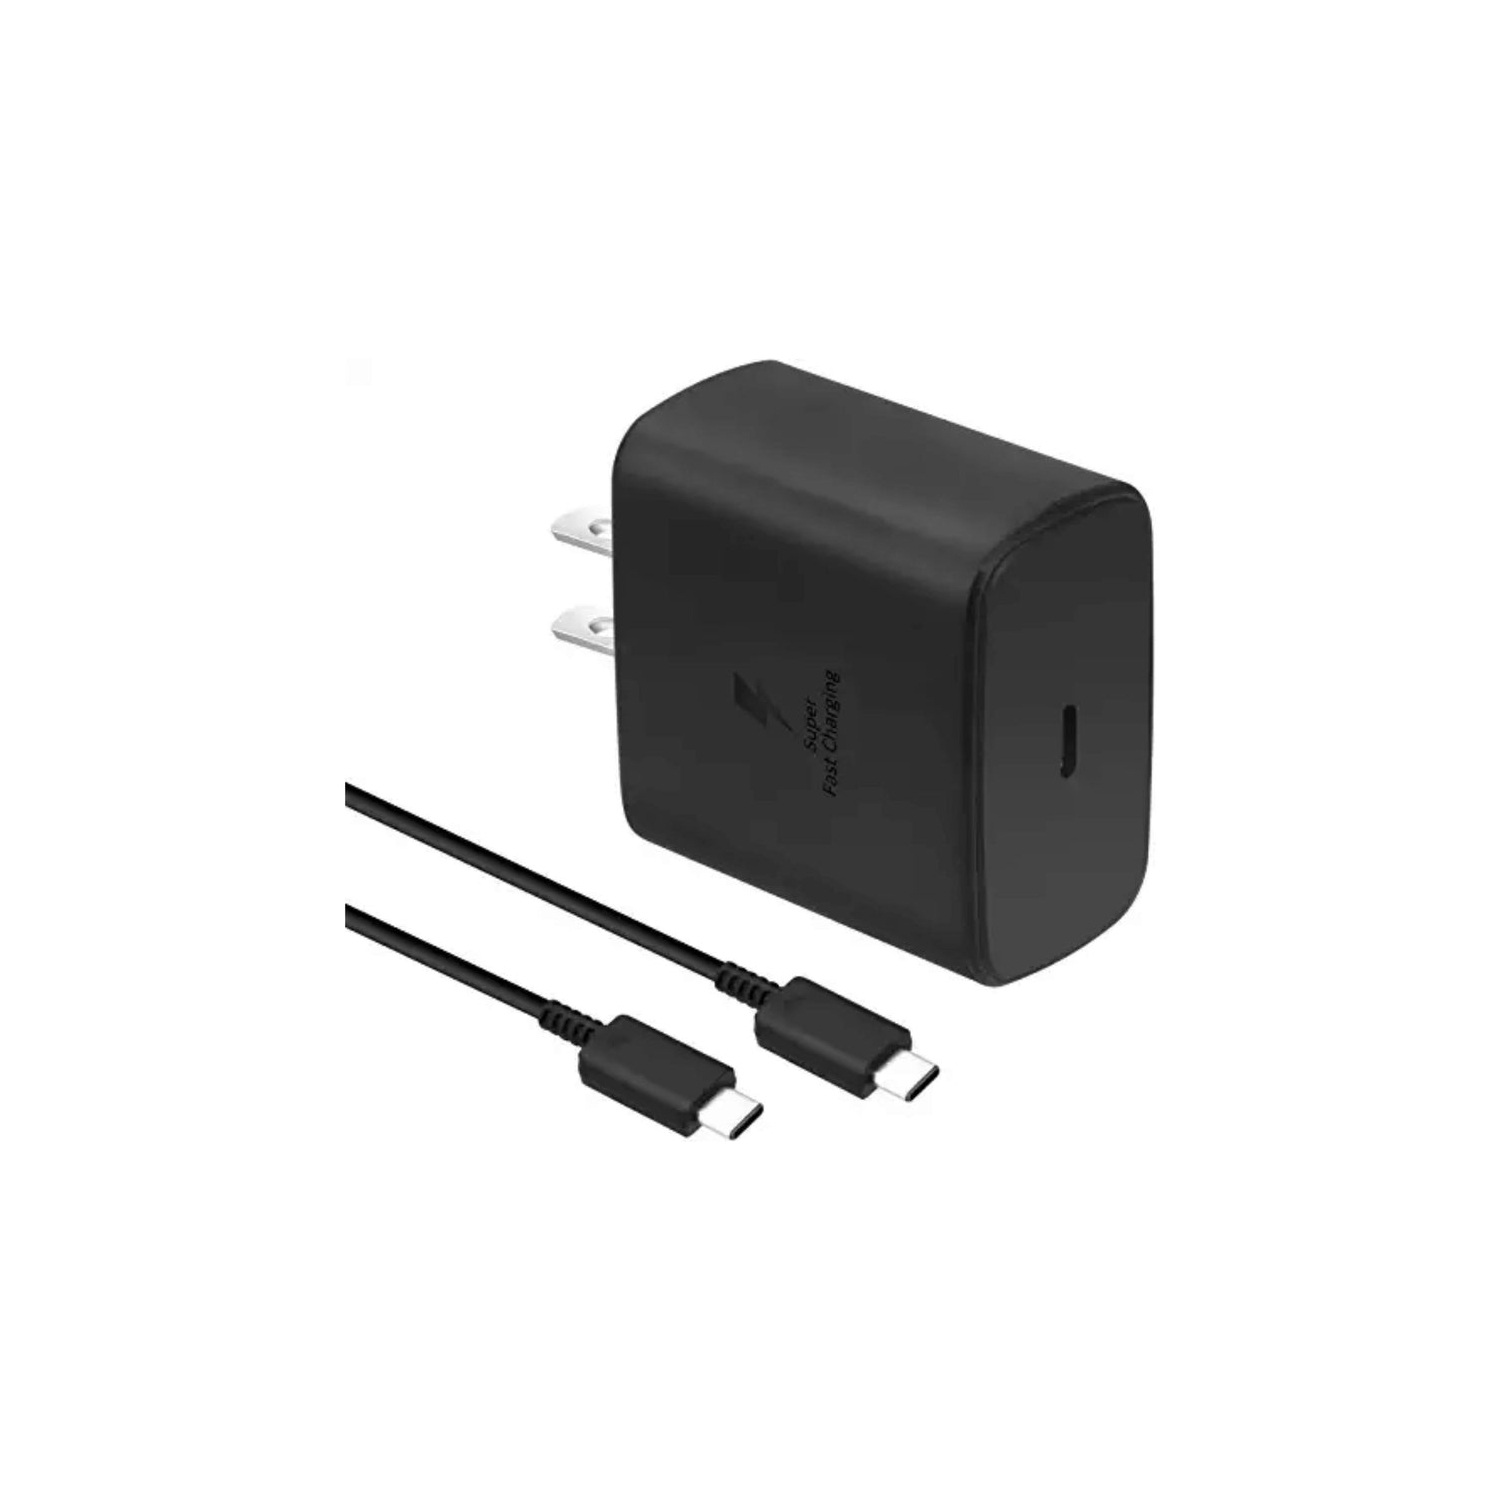 Refurbished (Good) - Samsung 45W PD Adapter with USB-C to USB-C Cable - 2-Meter